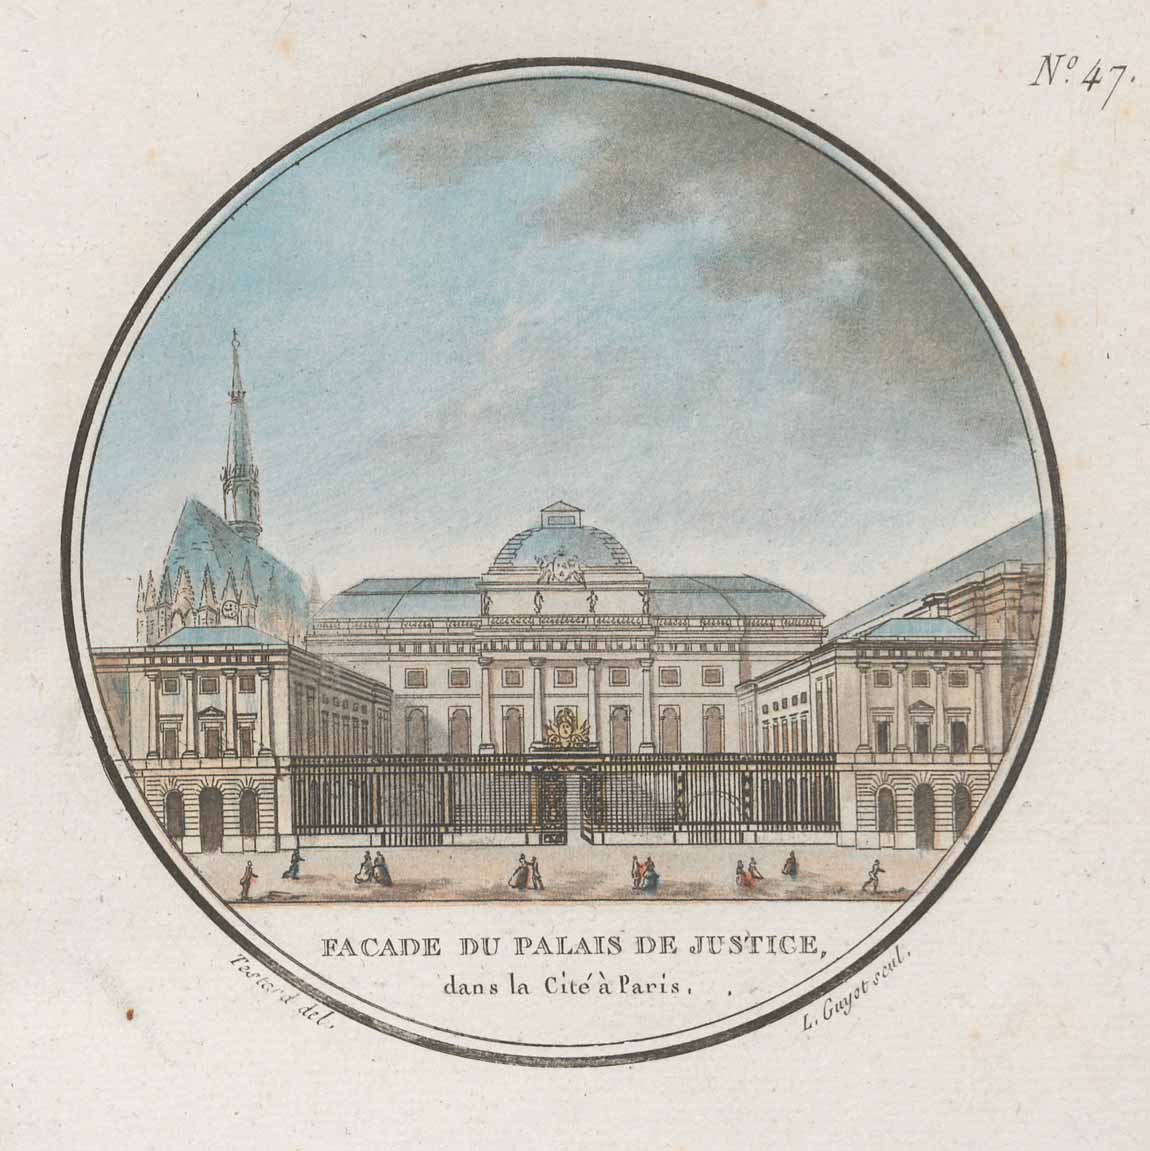 Aquatint engraving of the Palais de Justice in Paris enclosed in a circle border, with small figures walking in front of the building's gate.